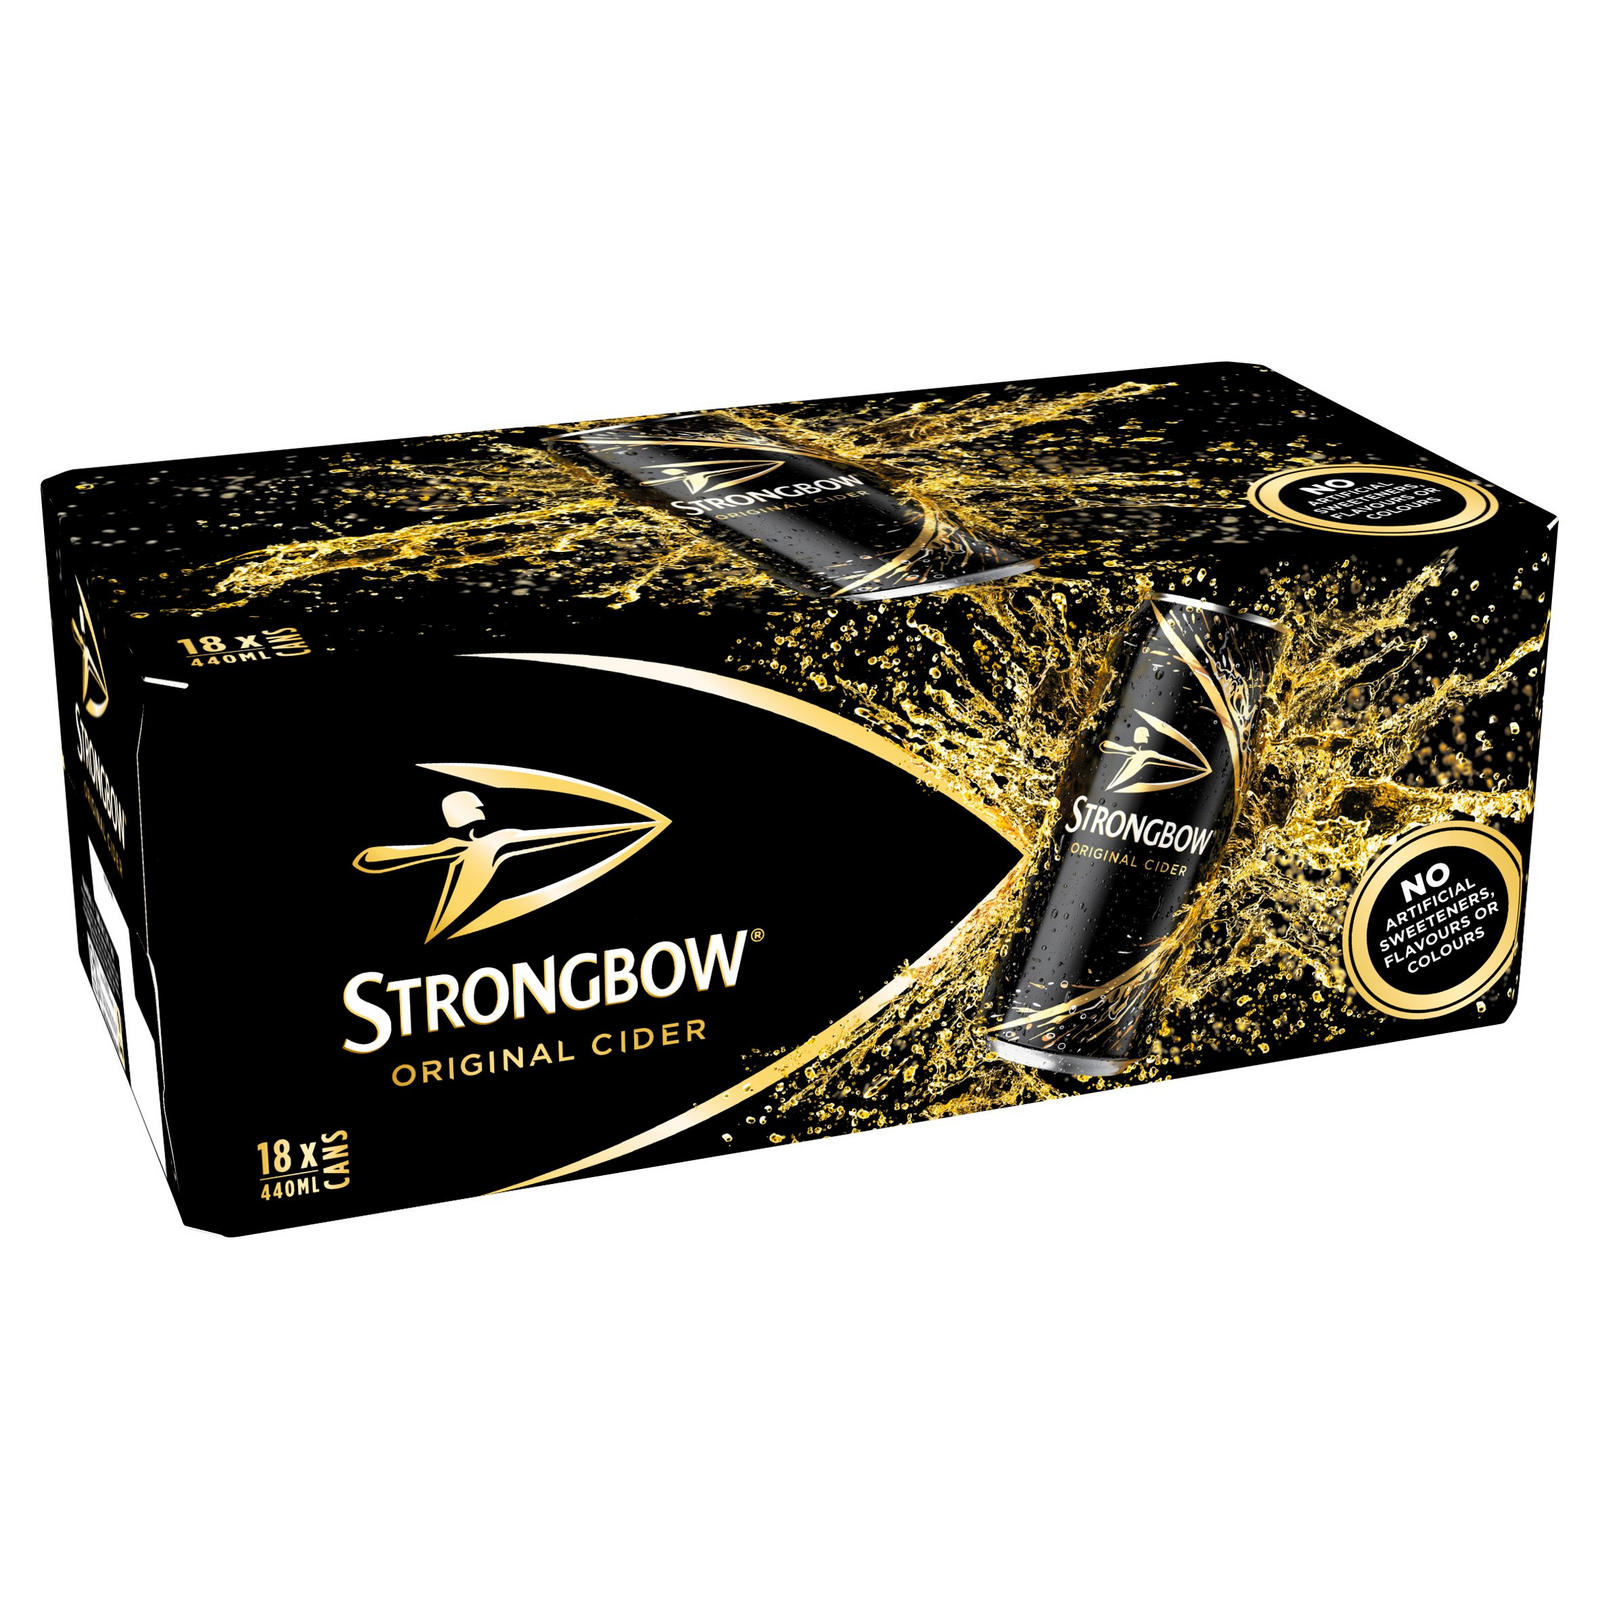 Strongbow Original Cider 18 x 440ml Cans | Cider | Iceland Foods